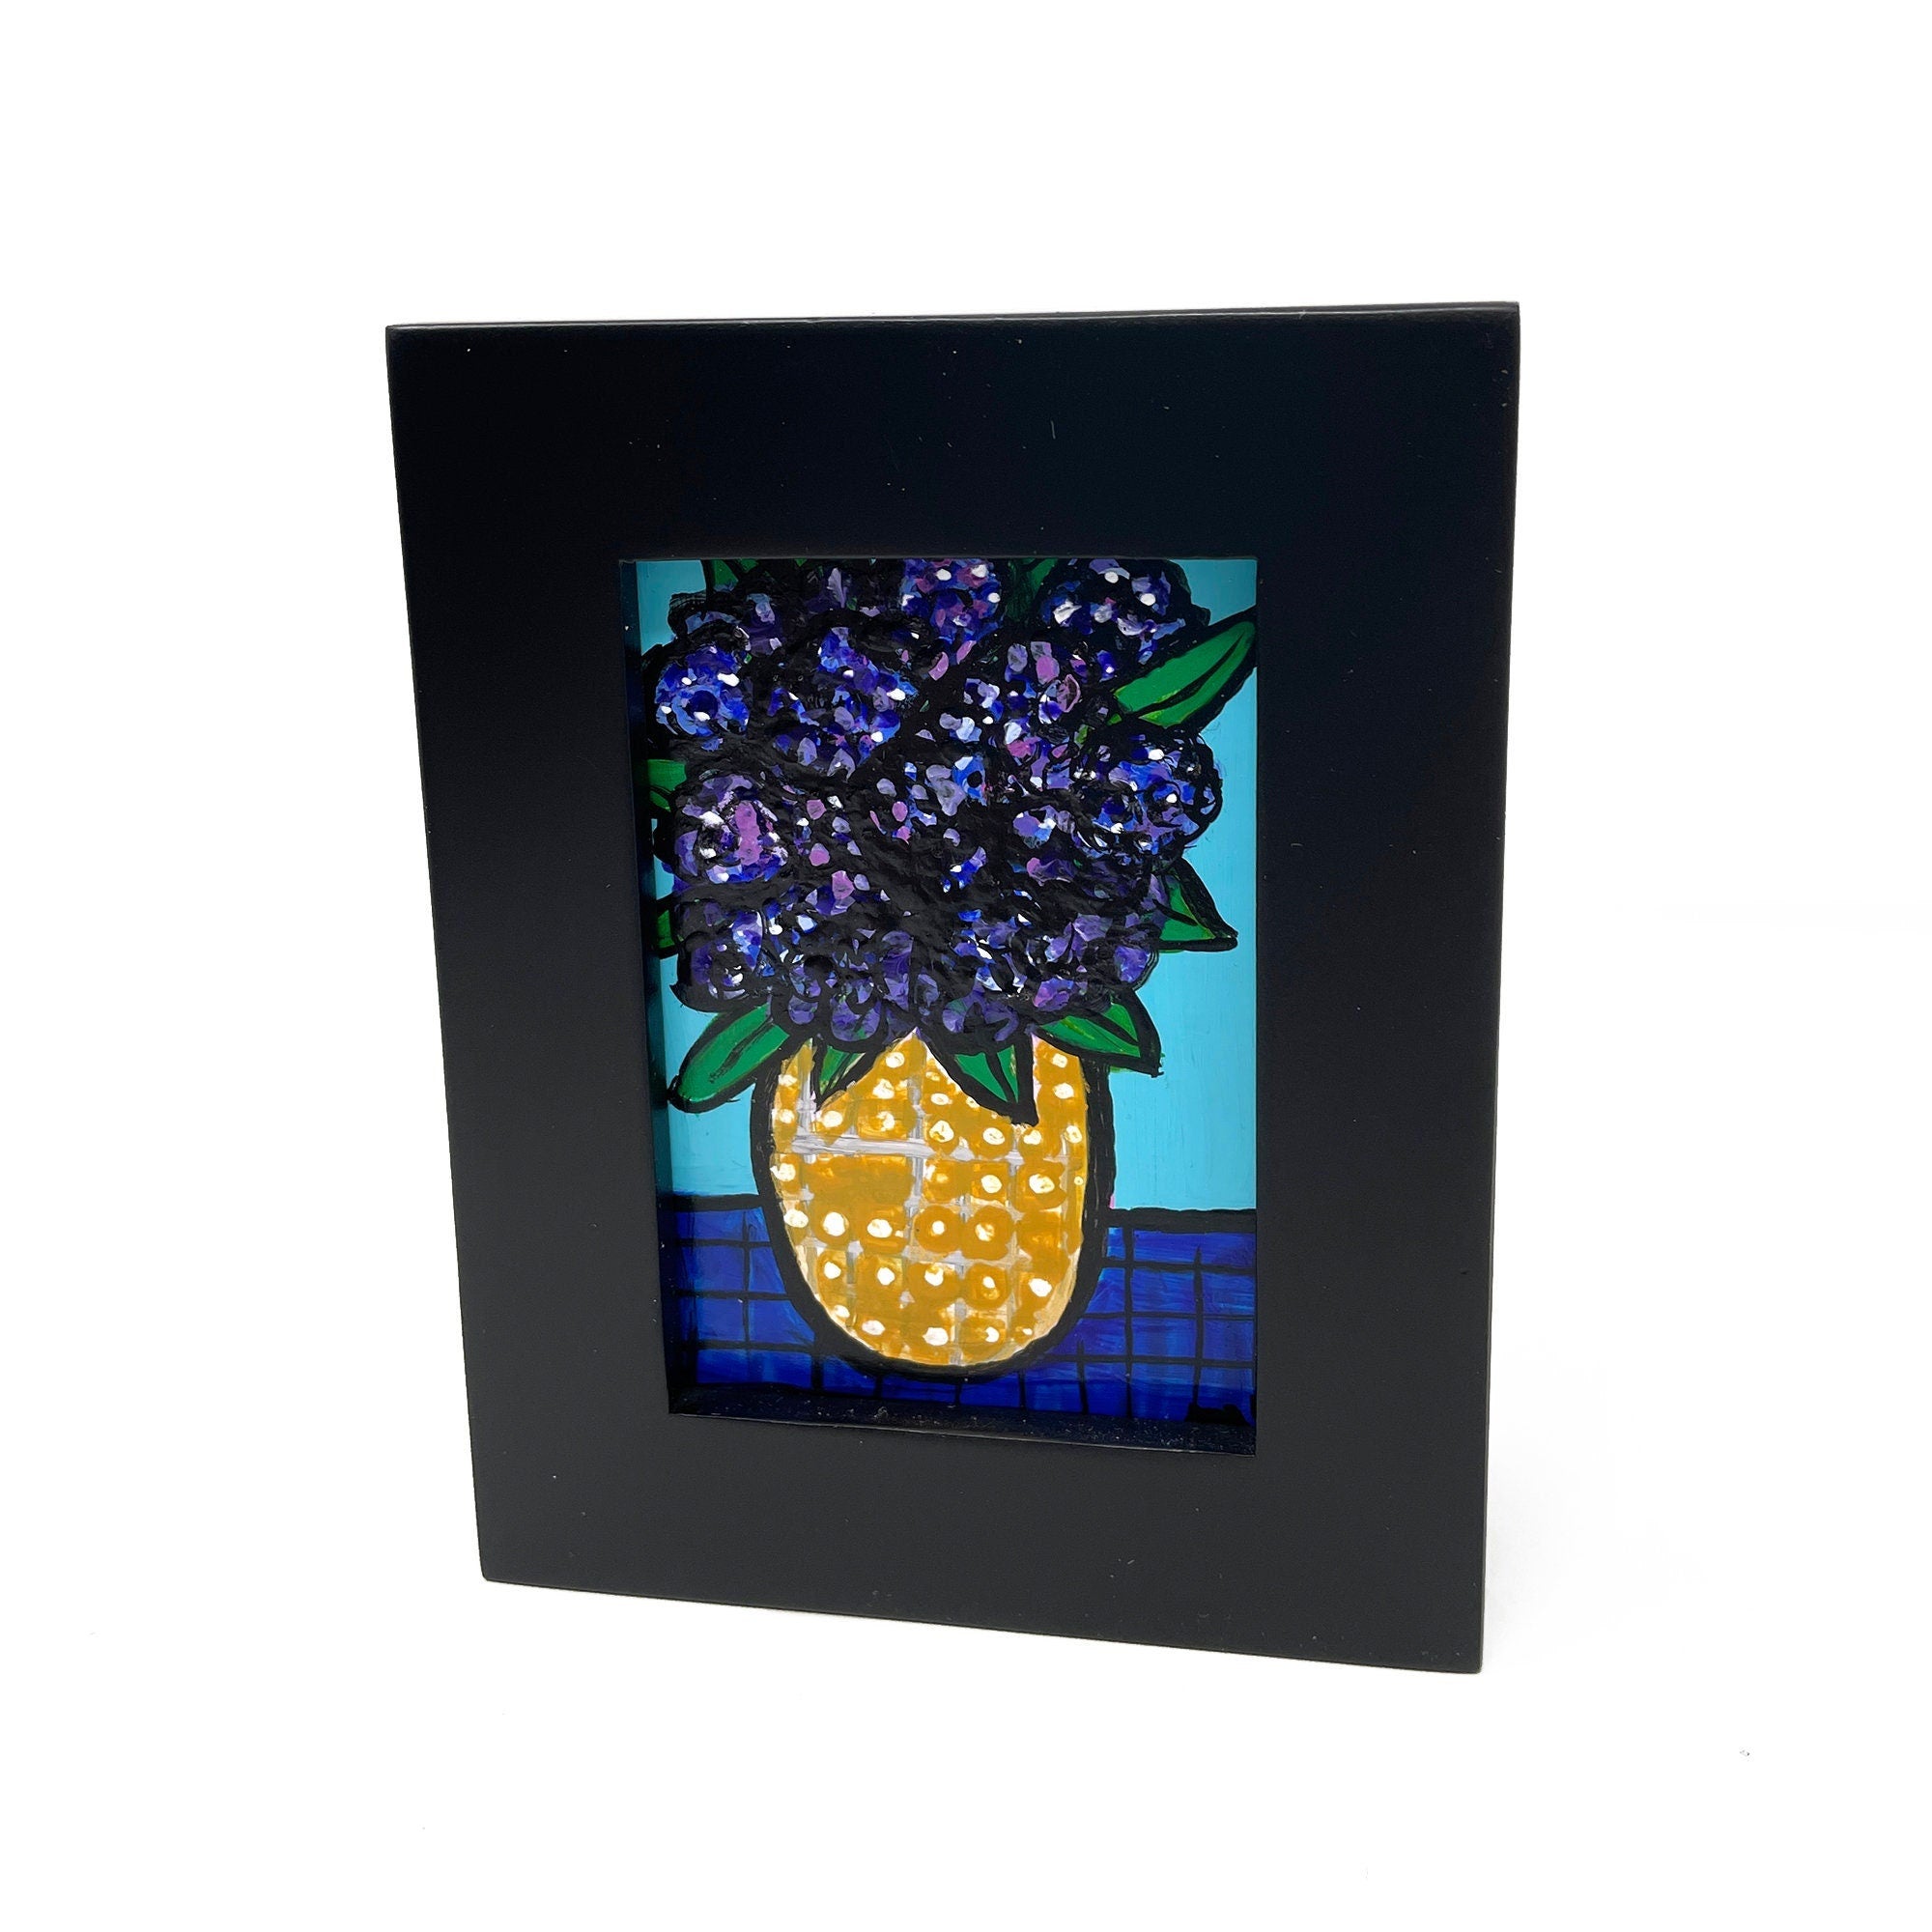 Mini Hydrangea Painting - Small Framed Floral Painting - 2.5 x 3.5 inches - Original Purple Flower Art